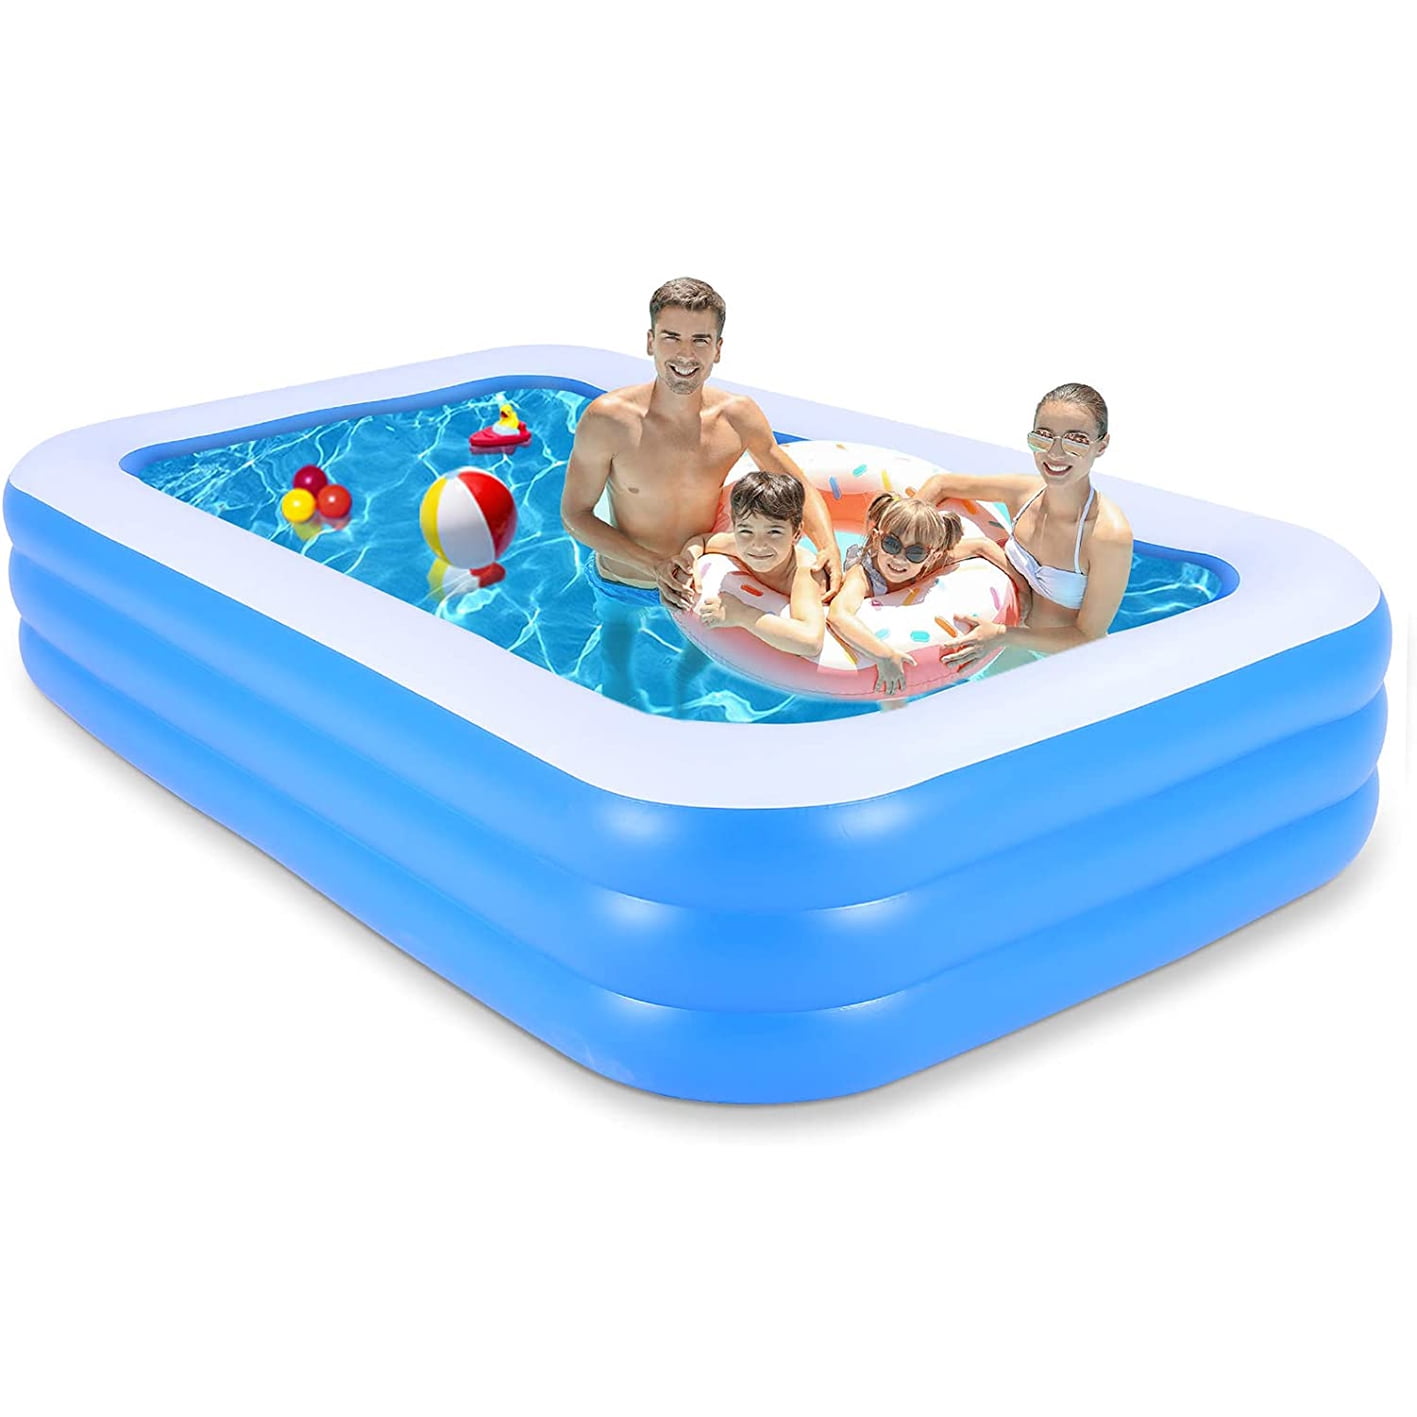 Summer Waves KB0706000 8.75ft x 26in Inflatable 4 Person Deluxe 